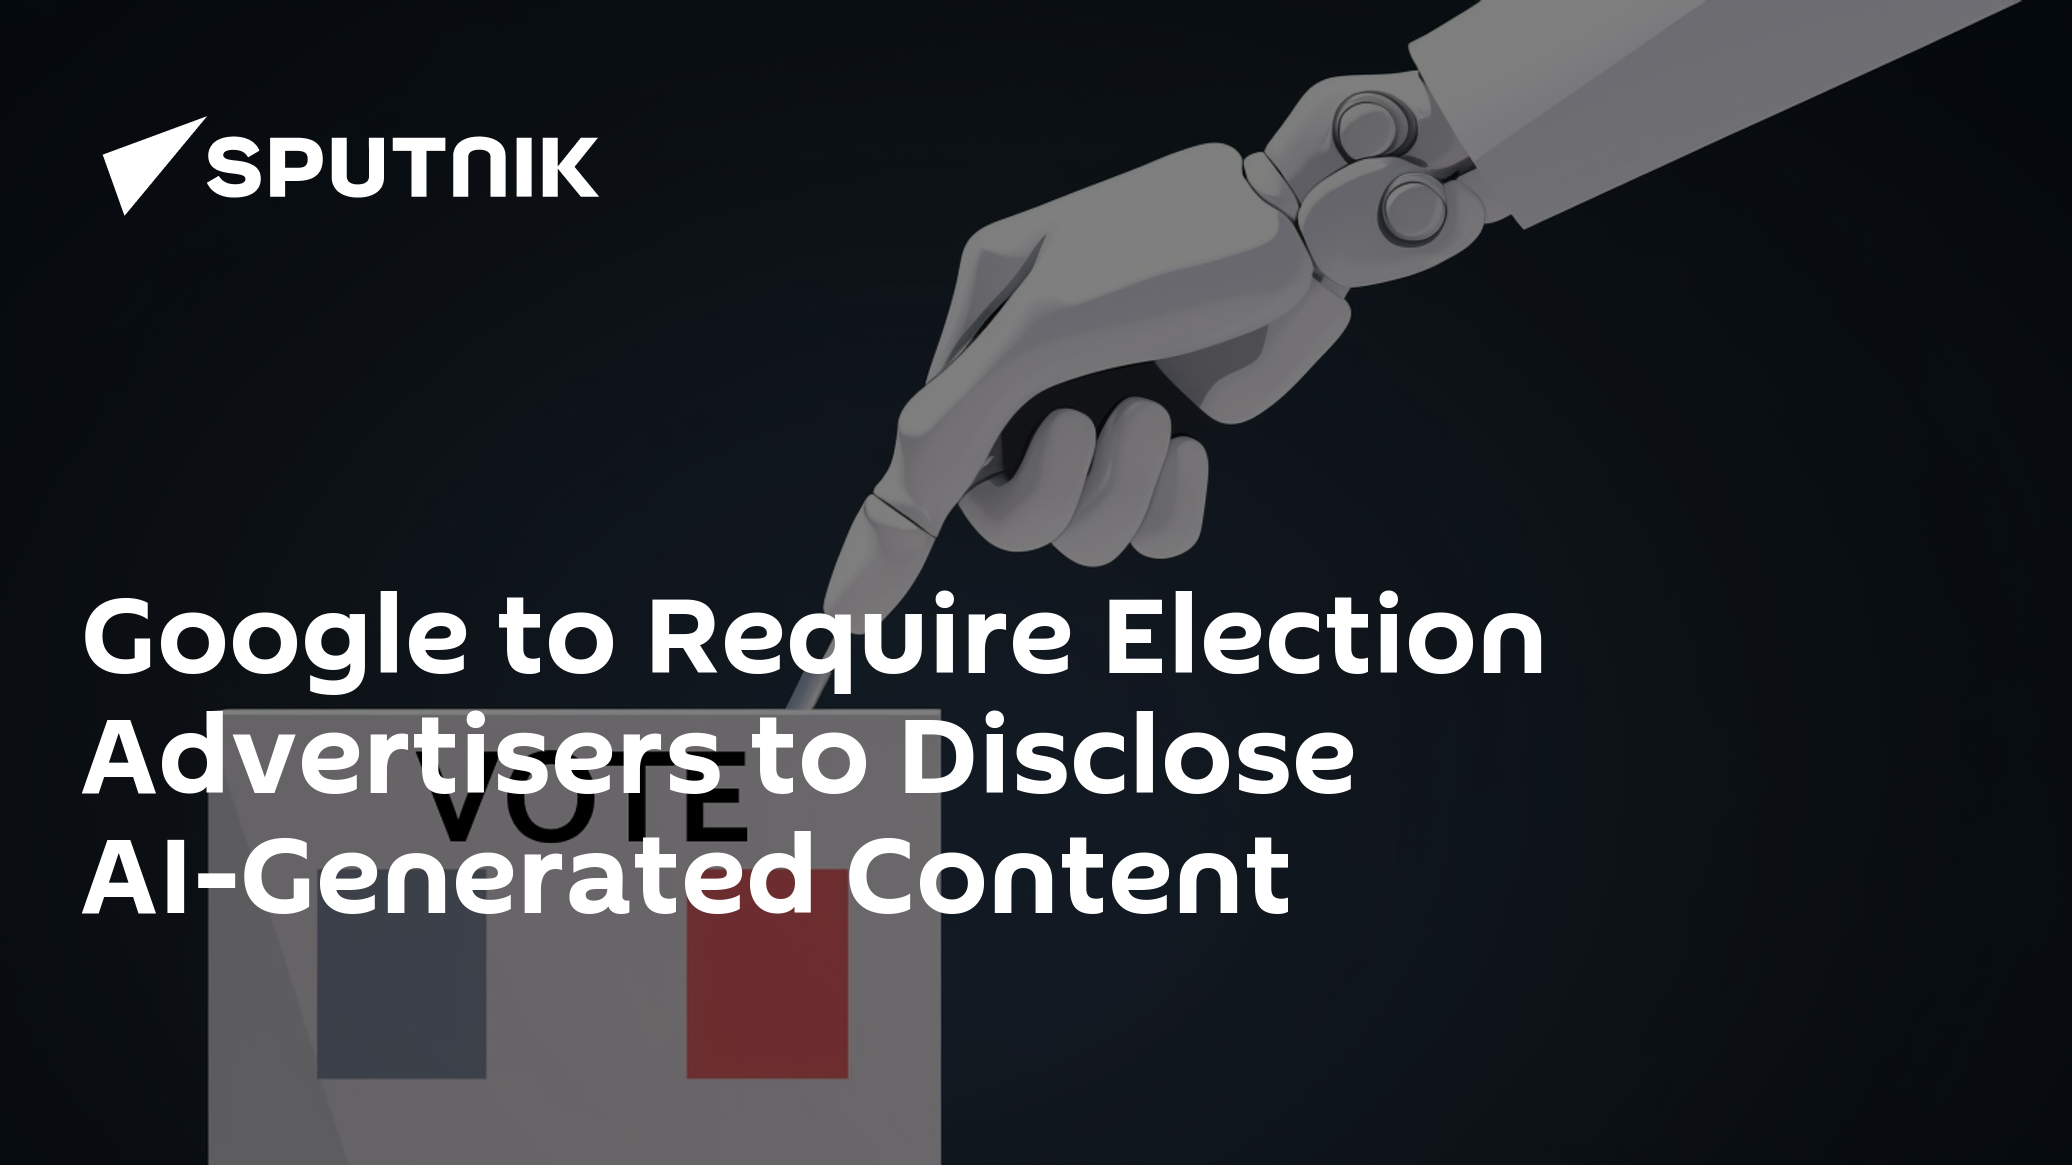 Google Will Require Election Advertisers to Disclose AI-Generated Content